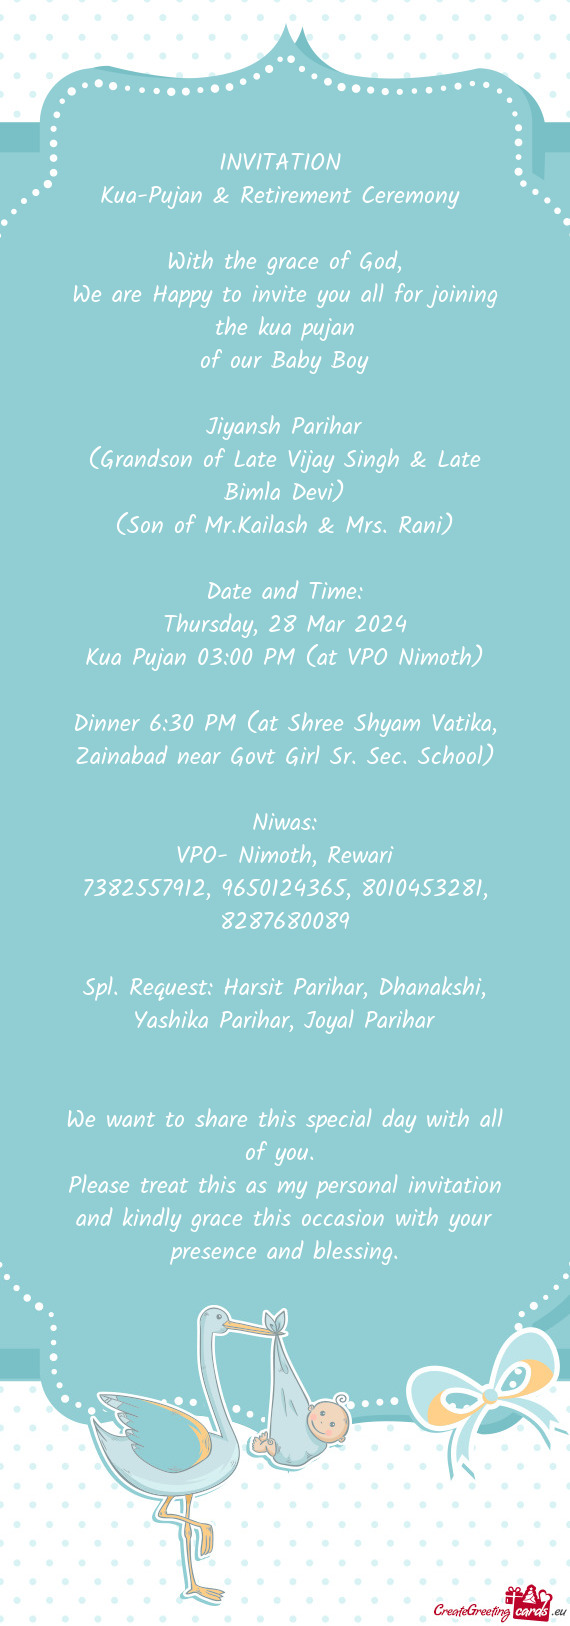 We are Happy to invite you all for joining the kua pujan of our Baby Boy Jiyansh Parihar (Gra